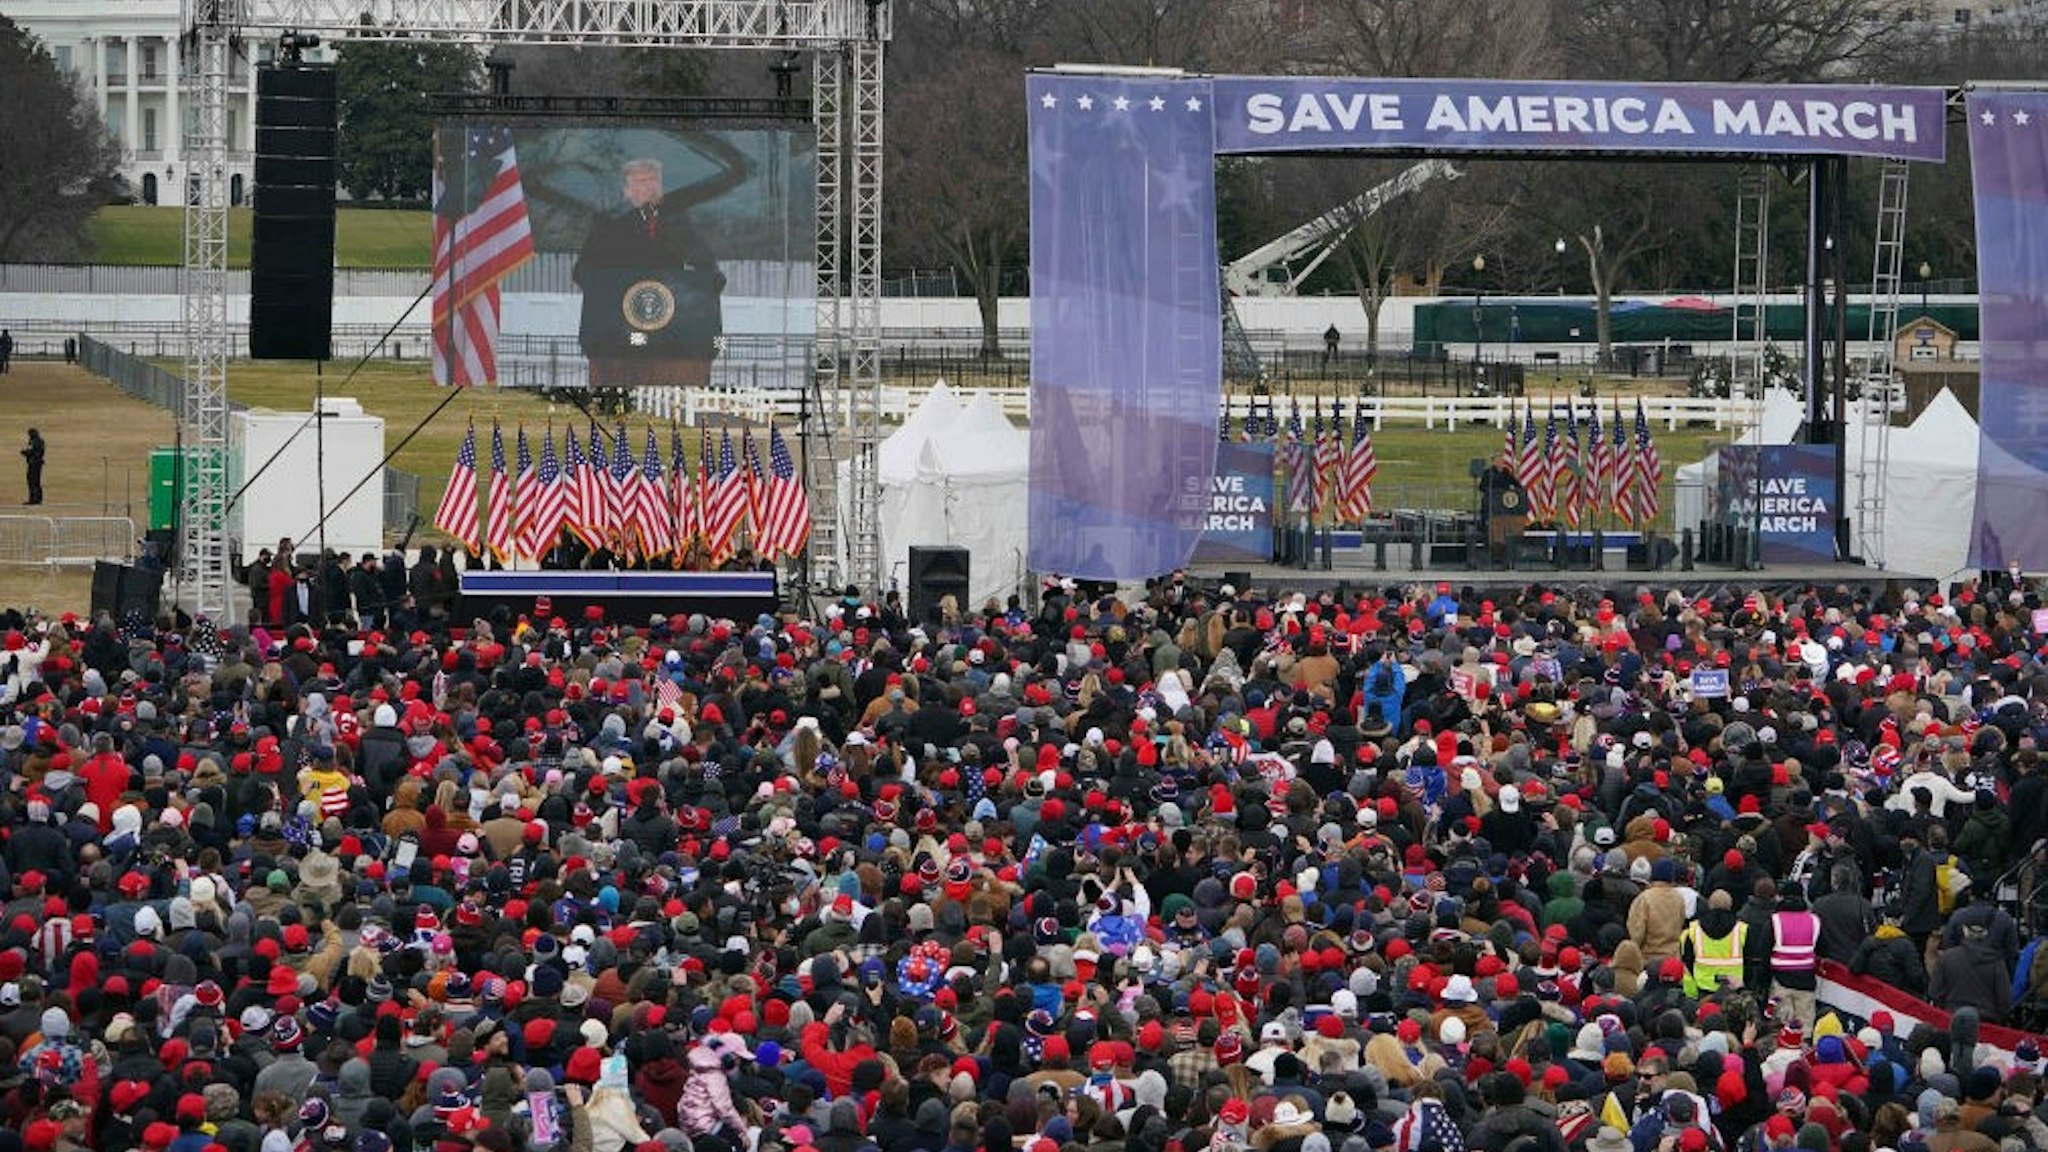 People gather as US President Donald Trump(C) speaks to supporters from The Ellipse near the White House on January 6, 2021, in Washington, DC. - Thousands of Trump supporters, fueled by his spurious claims of voter fraud, are flooding the nation's capital protesting the expected certification of Joe Biden's White House victory by the US Congress. (Photo by MANDEL NGAN / AFP) (Photo by